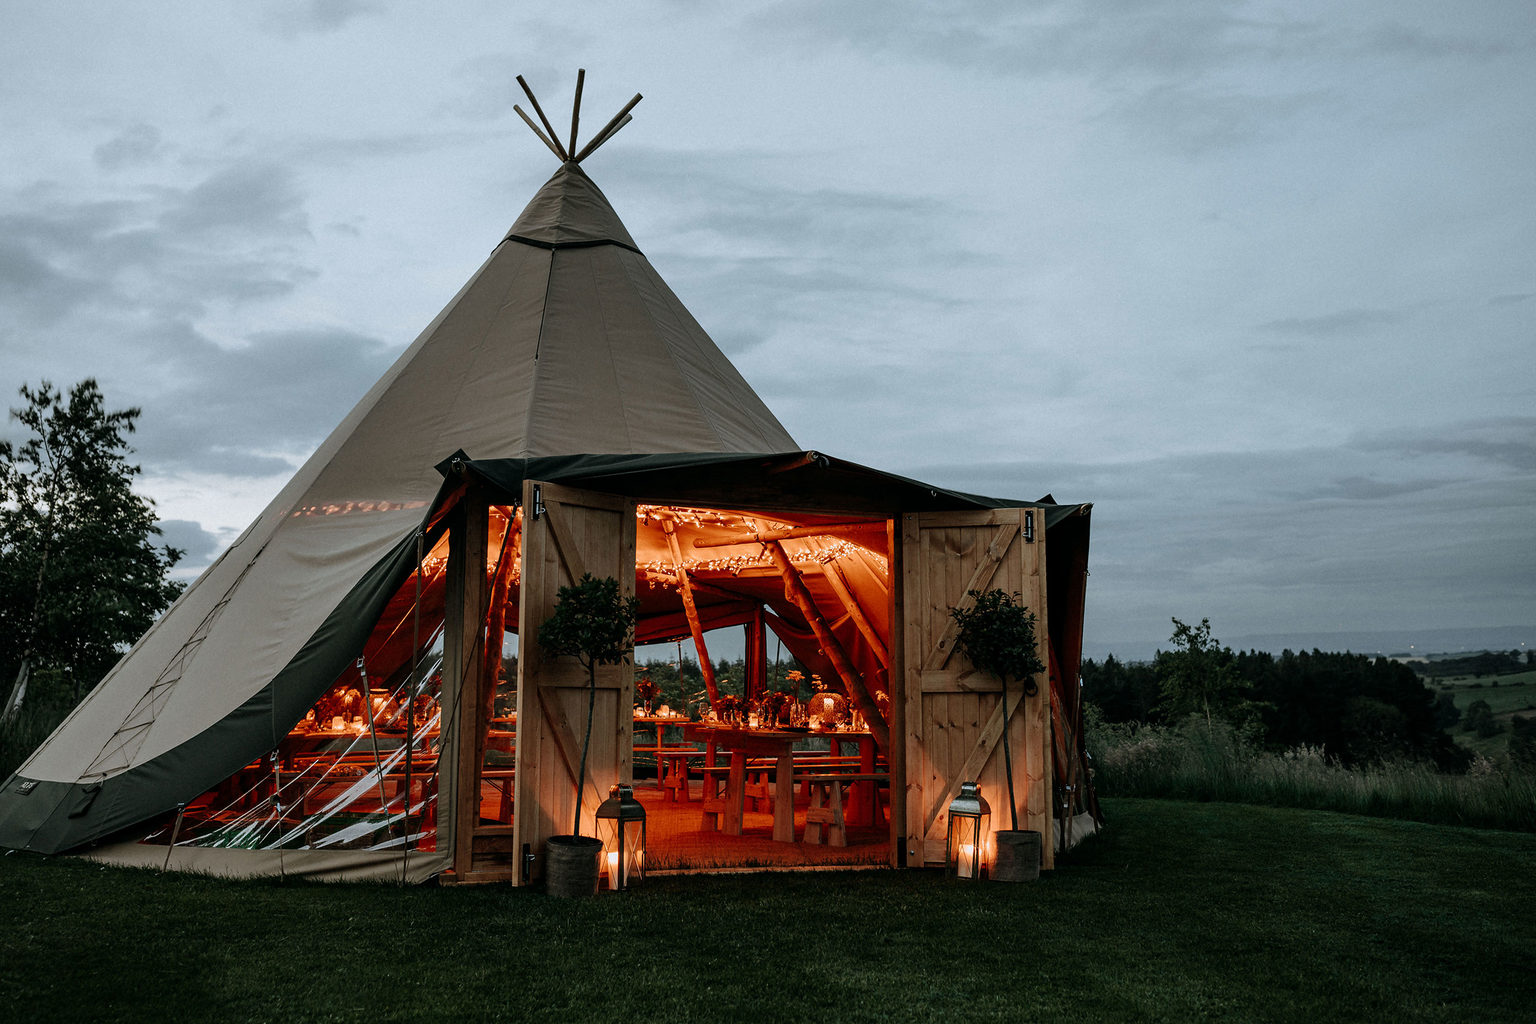 Exterior of a tipi at night, illuminated by candles for a celebration event, at Swinton Bivouac in North Yorkshire